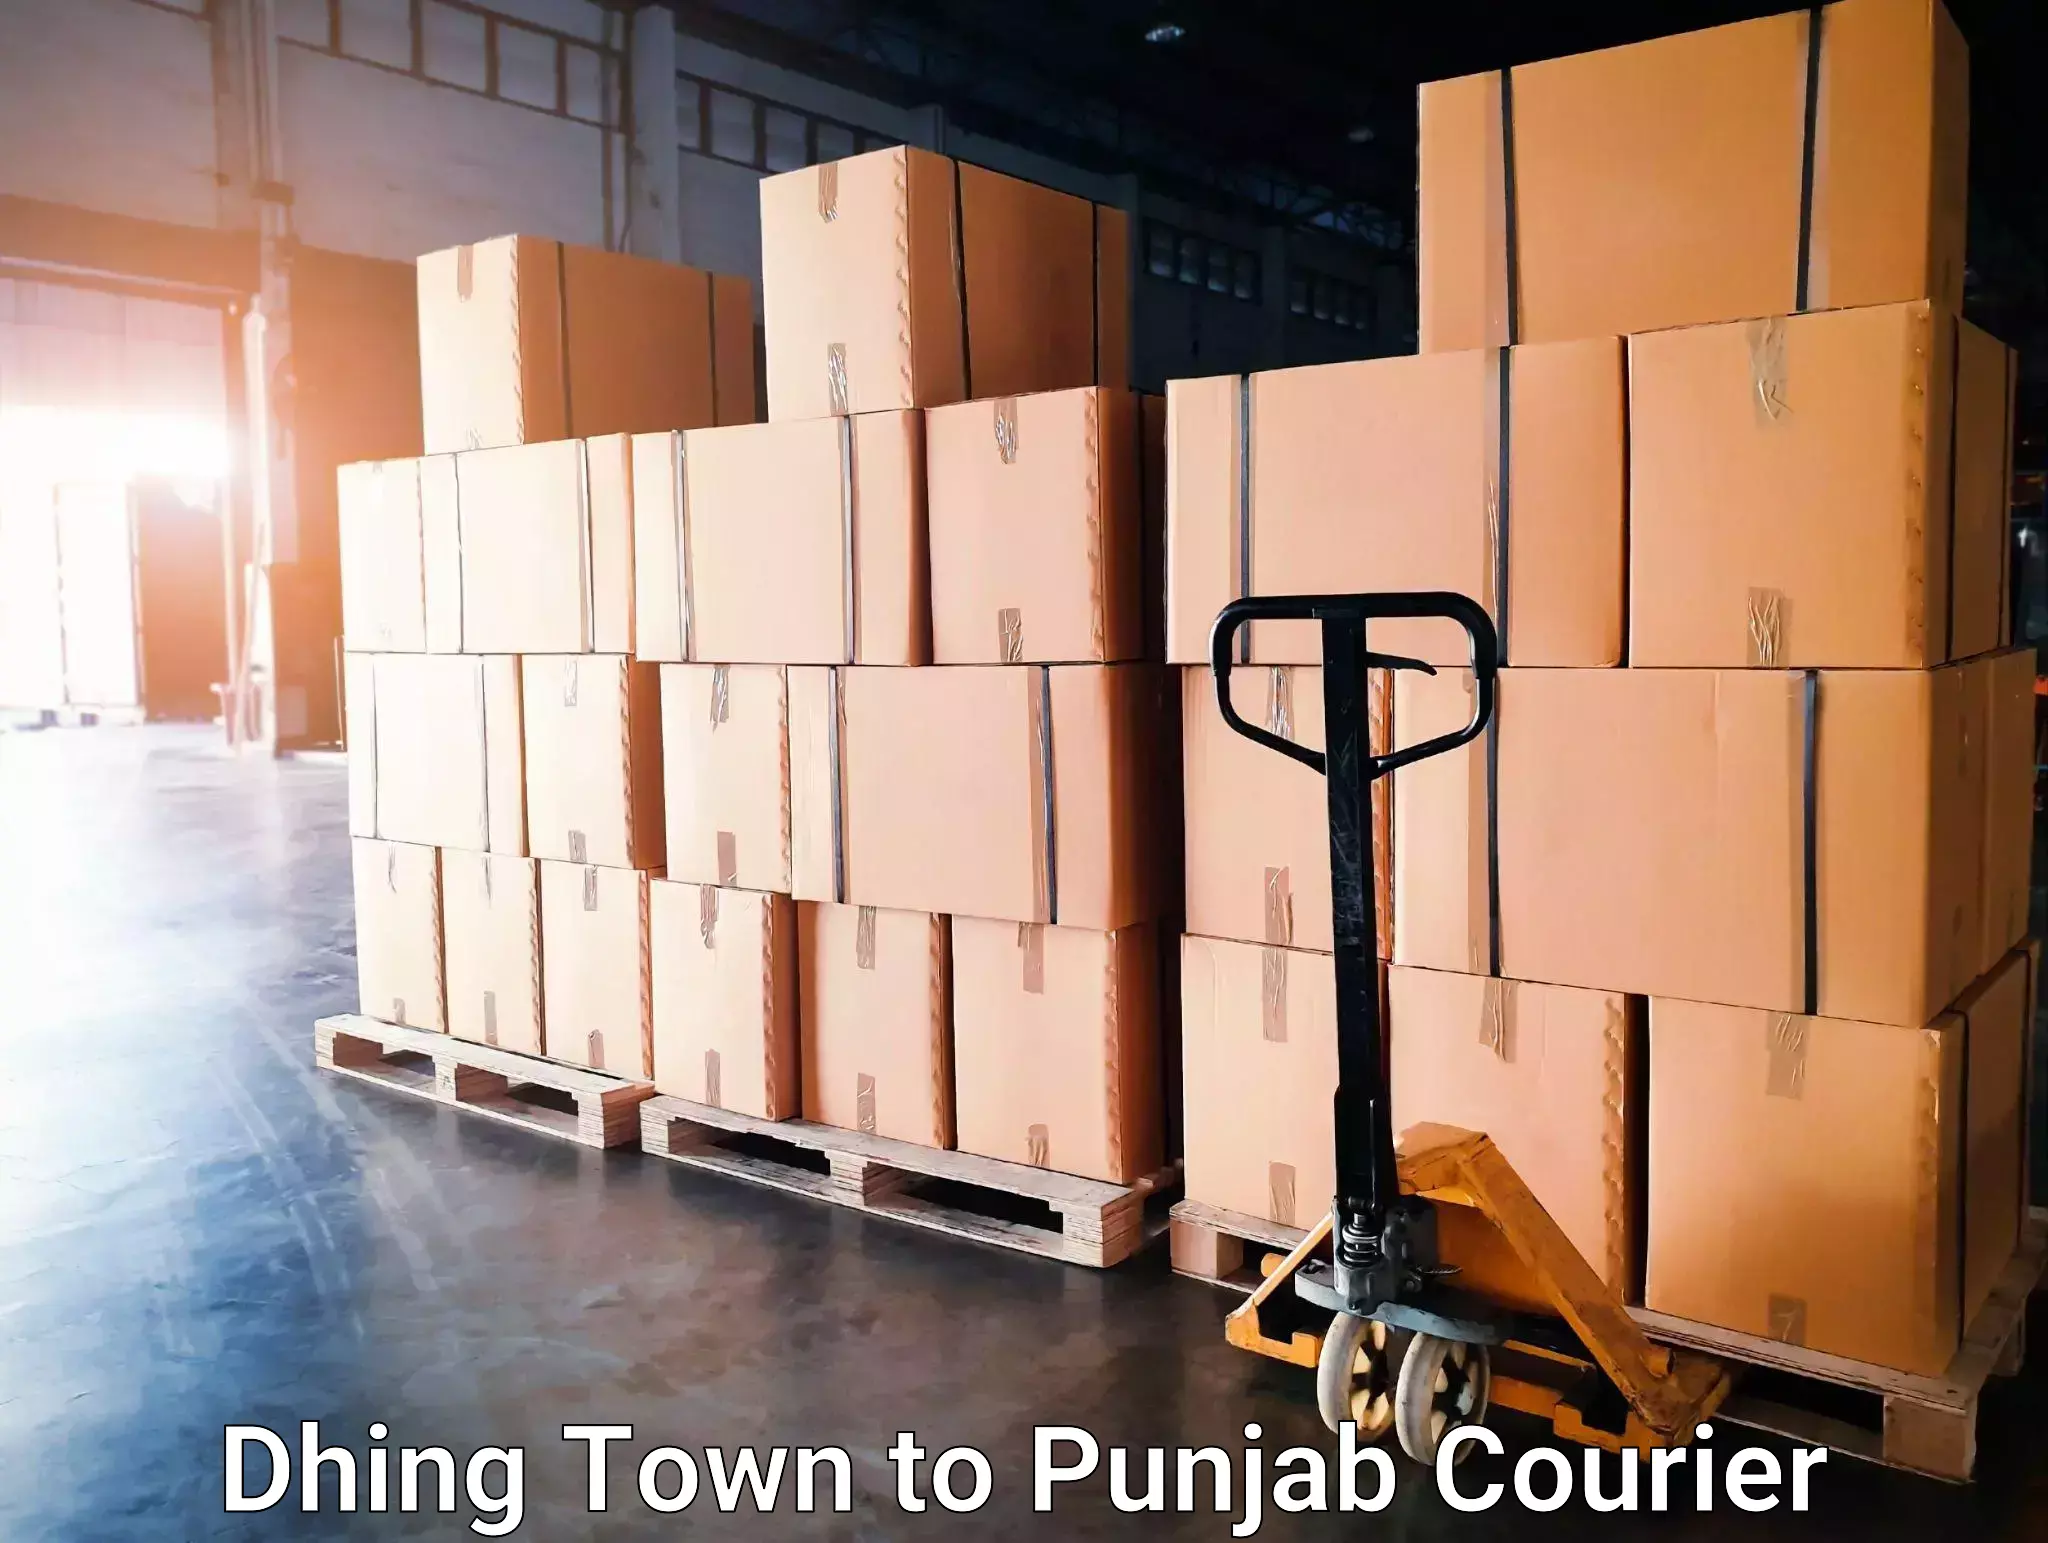 Delivery service partnership Dhing Town to Zirakpur